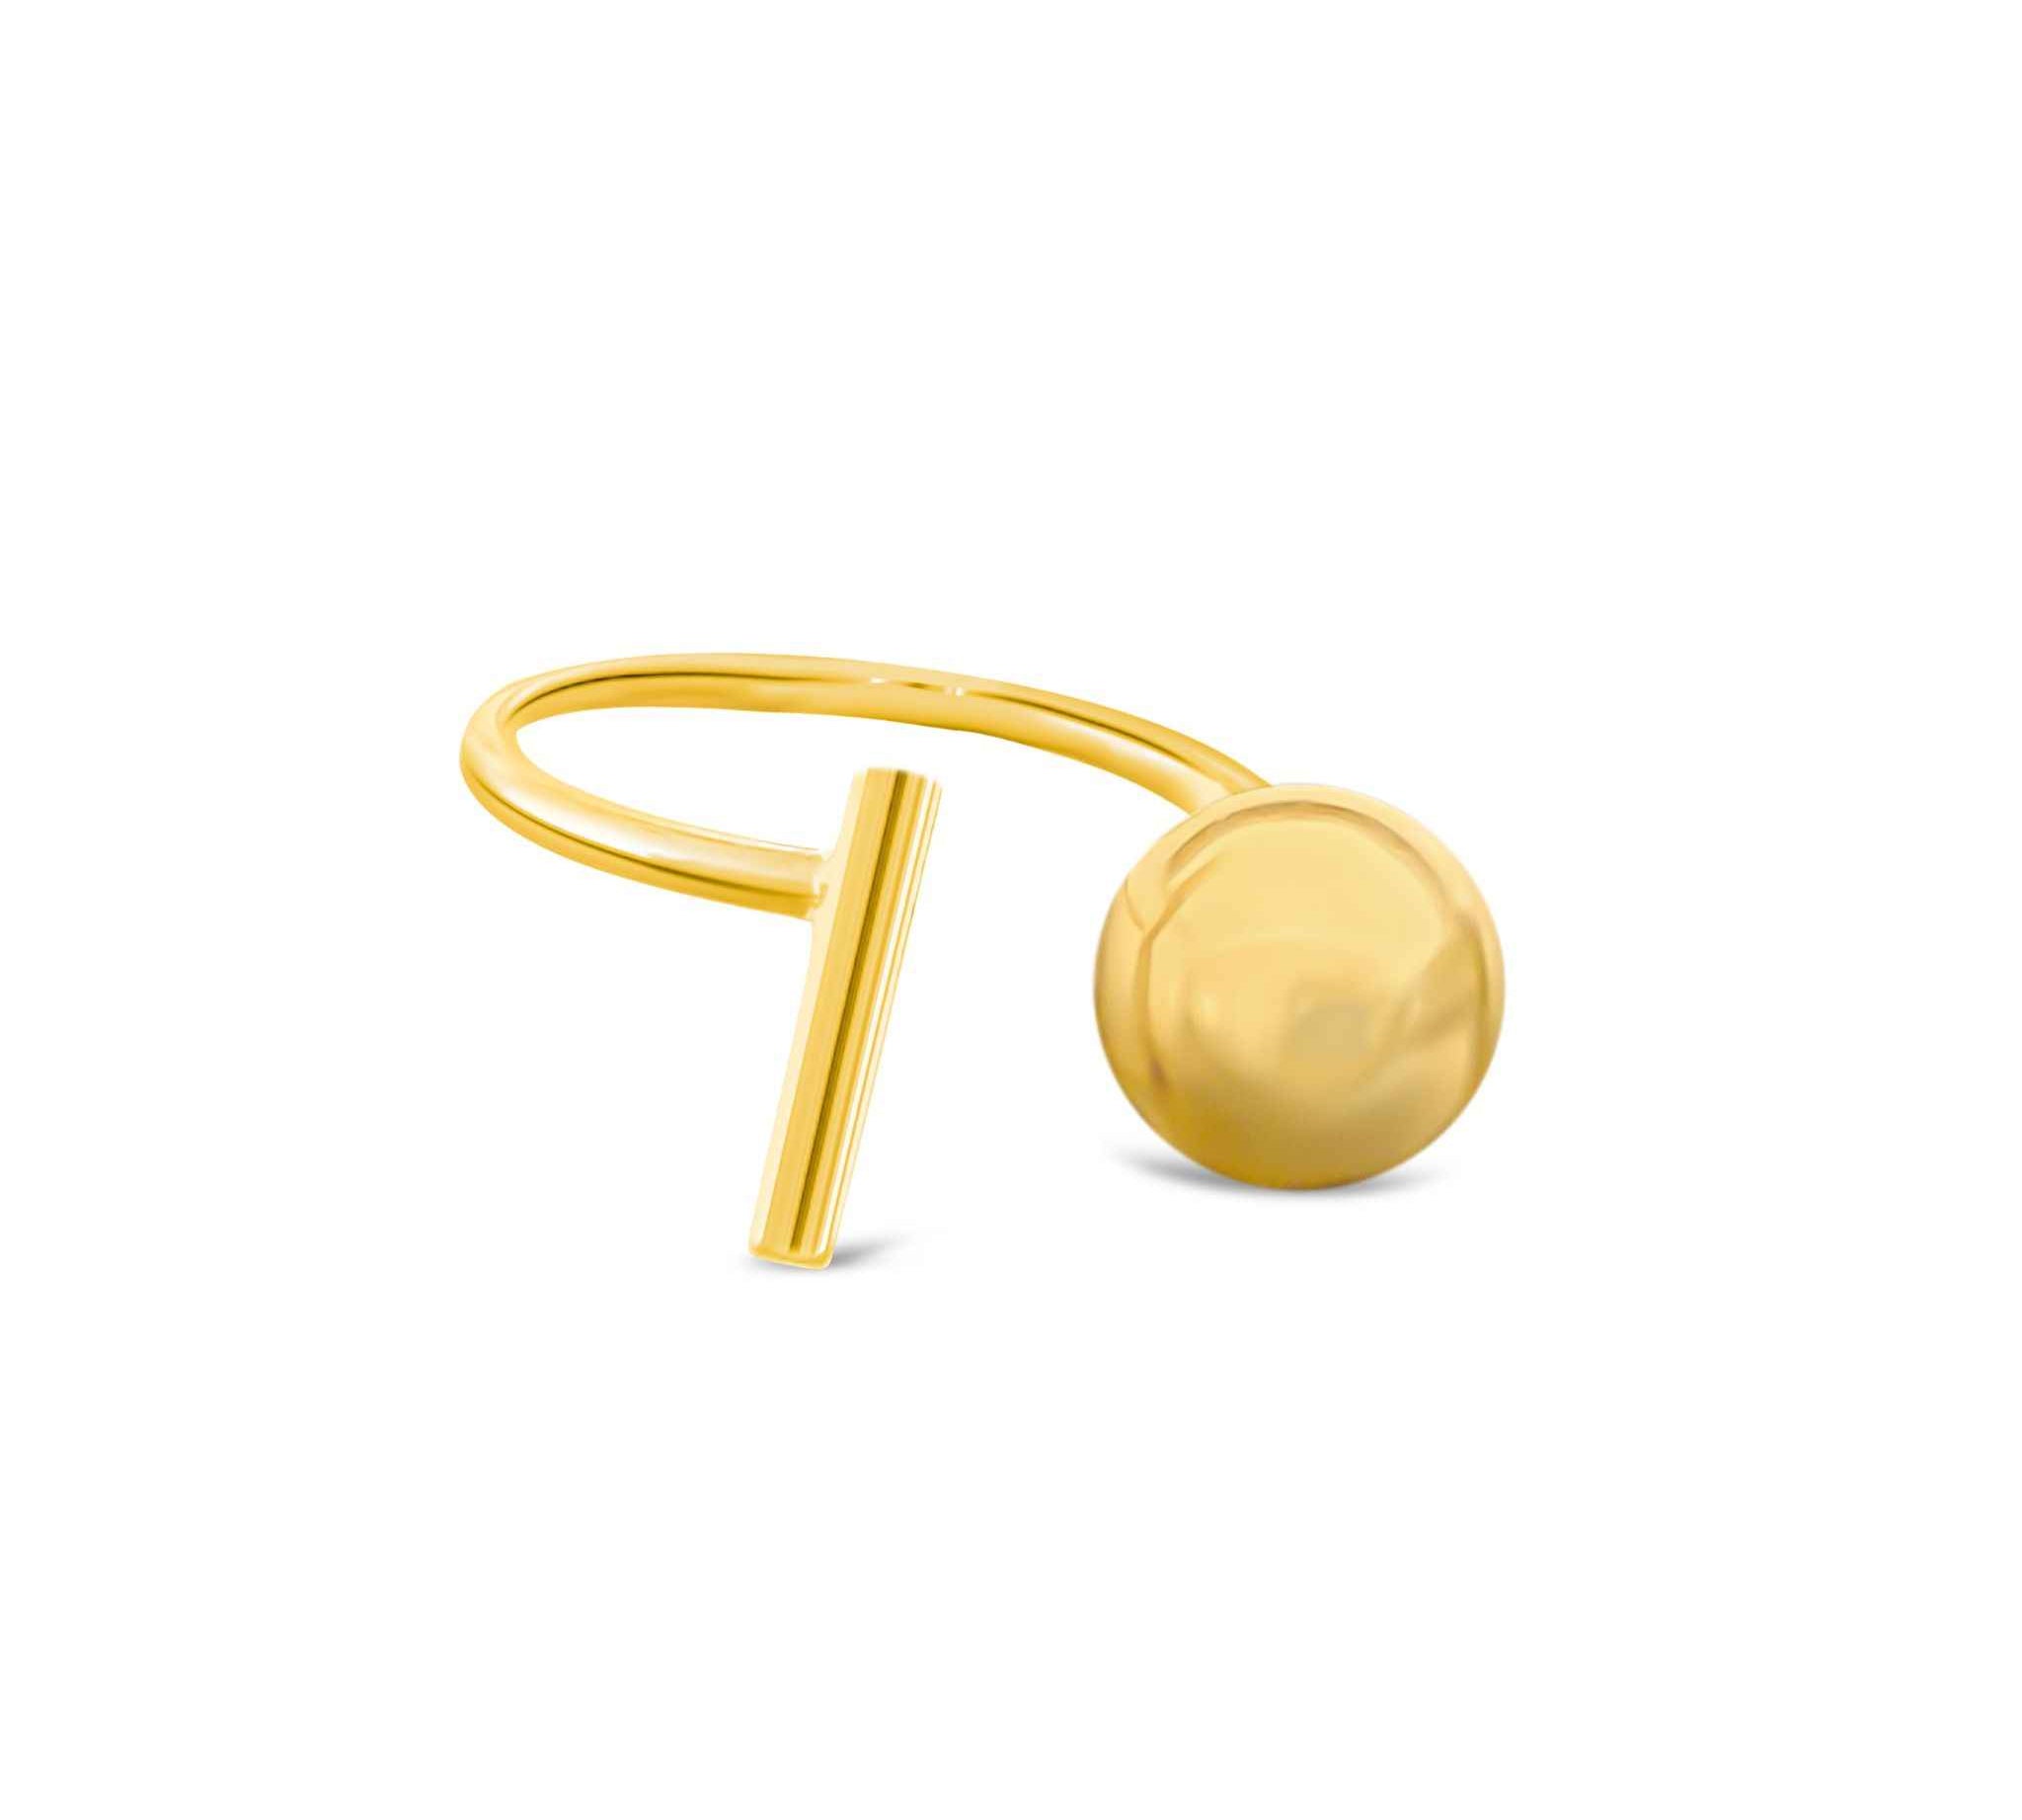 Trendy Women's T-Bar Ring in Gold by Alessandra James, minimalist and modern design perfect for everyday wear.